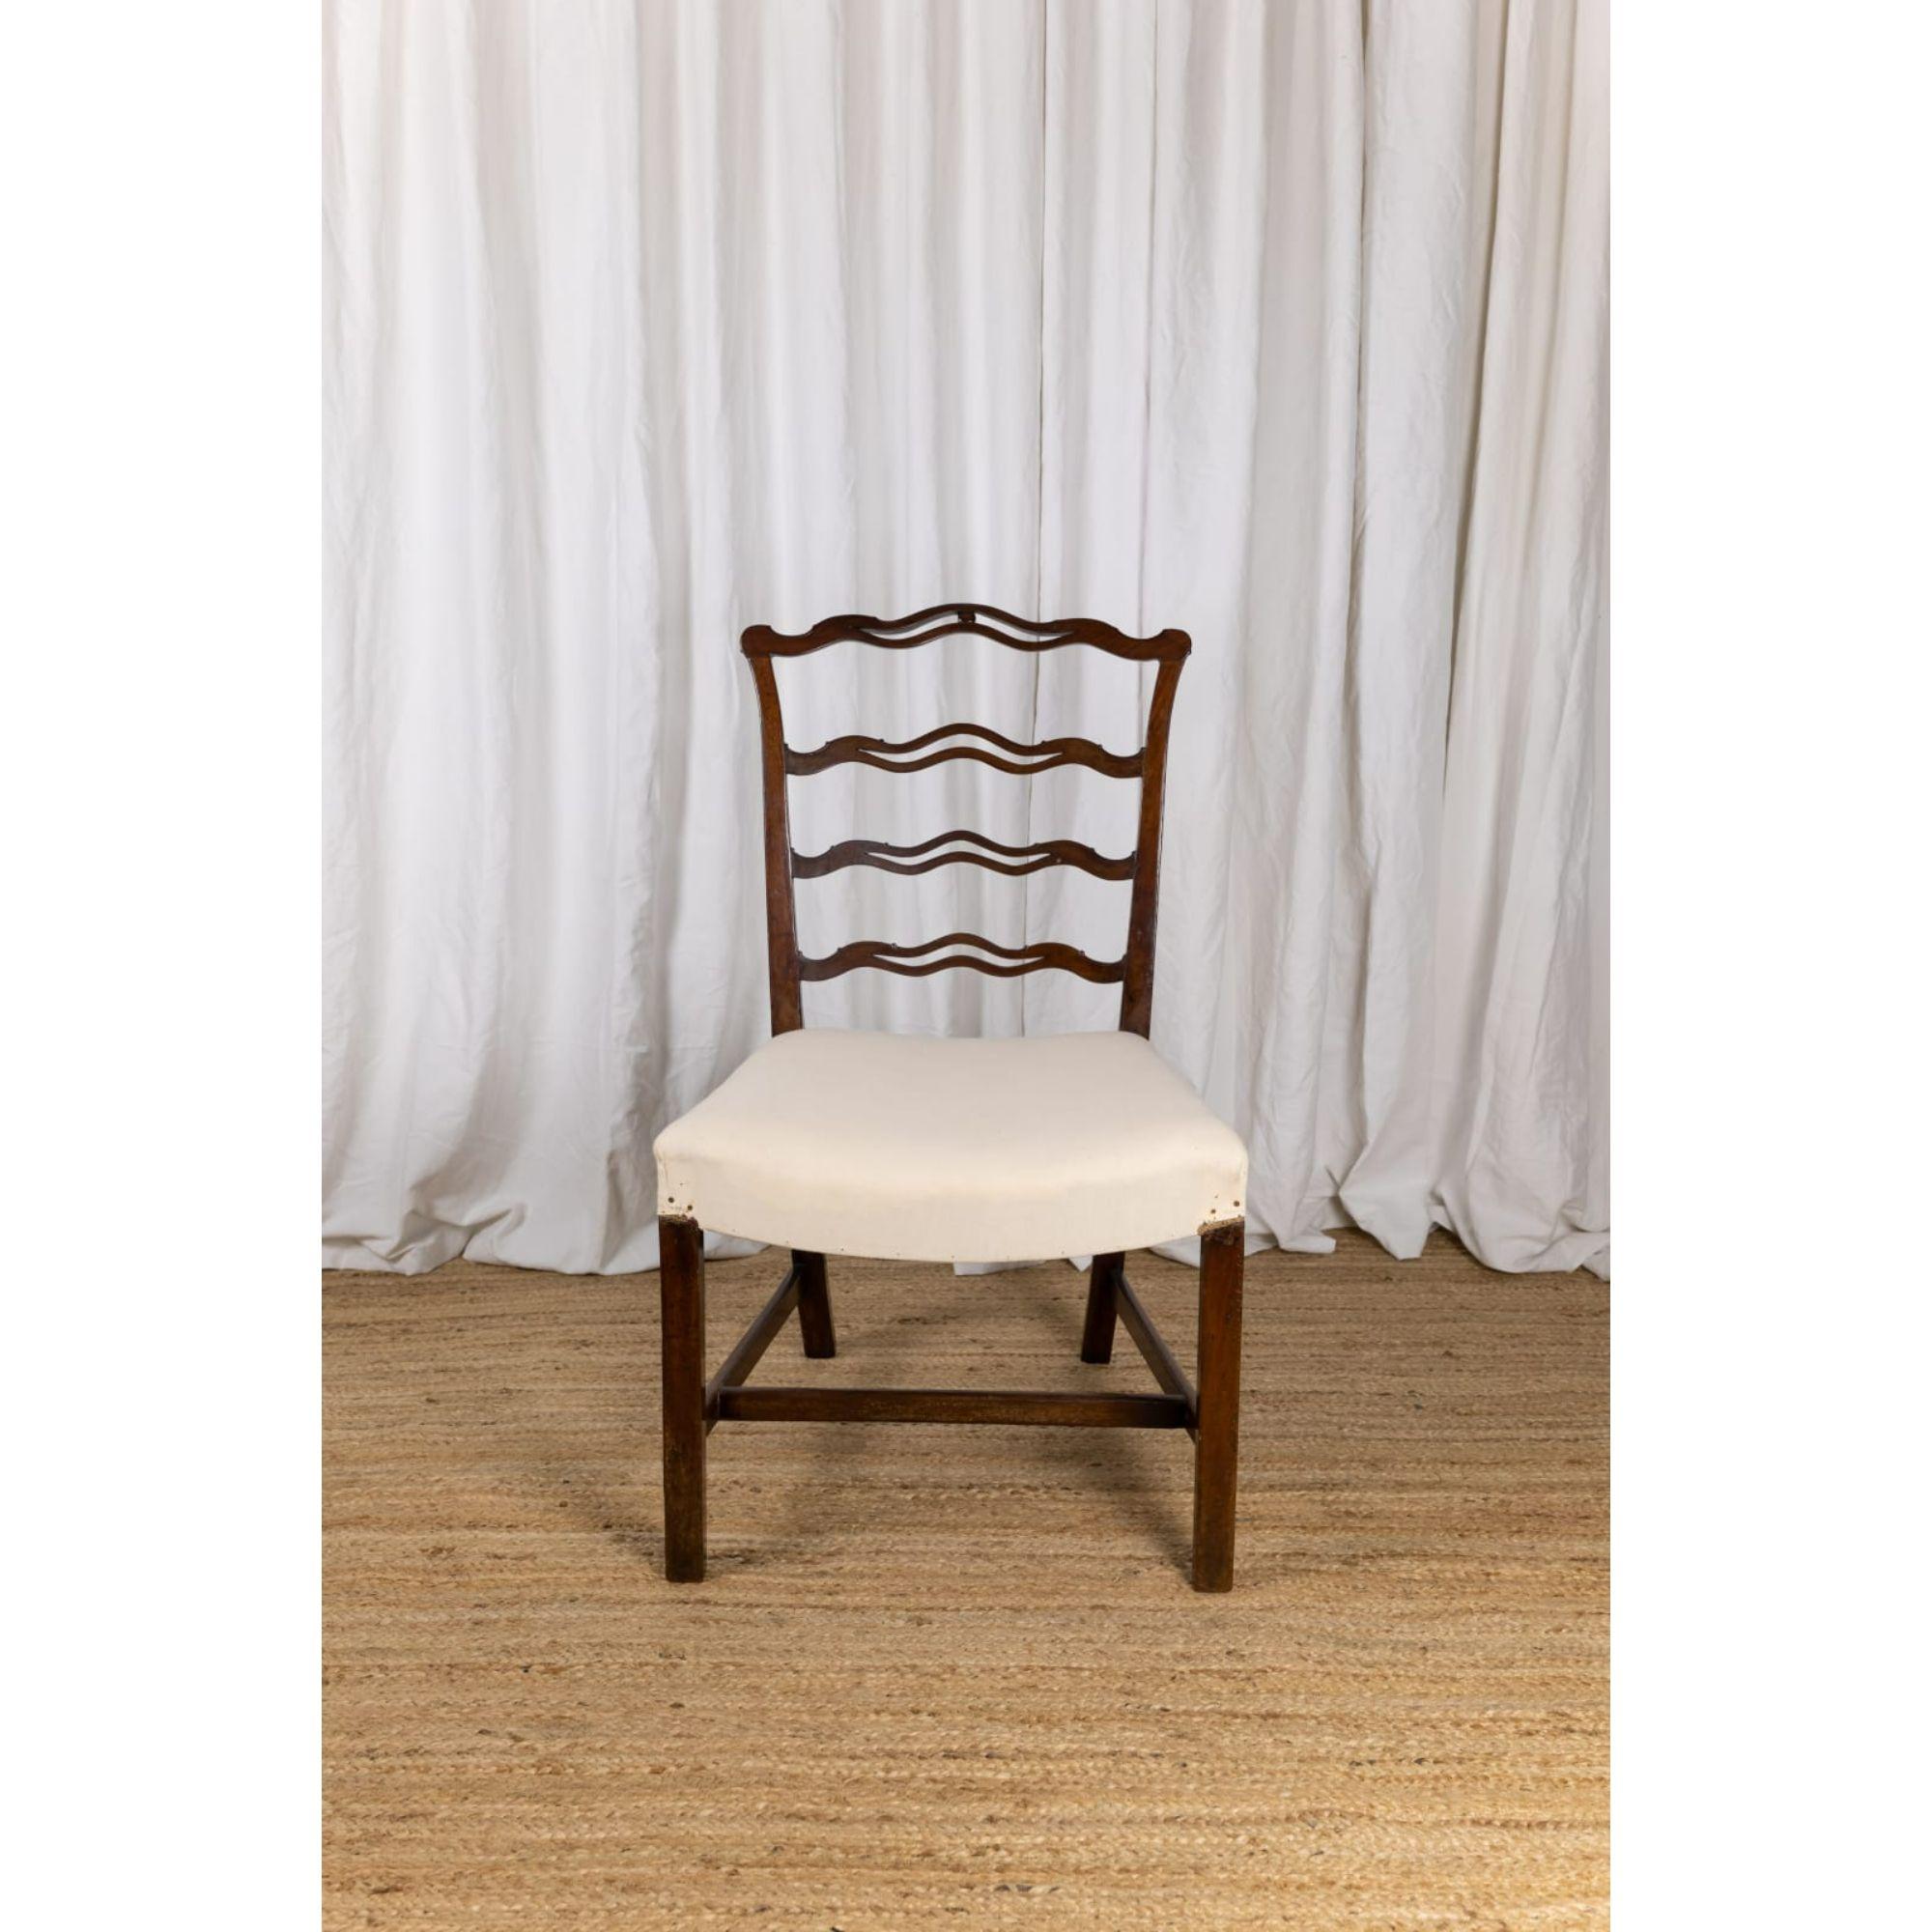 Chippendale period ribbon back side chair, circa 1780

A generously scaled George III 'ribbon' back mahogany side chair. Ladder back with an upholstered seat, standing on square legs united by an 'H' stretcher. English, circa 1780.

Dimensions: